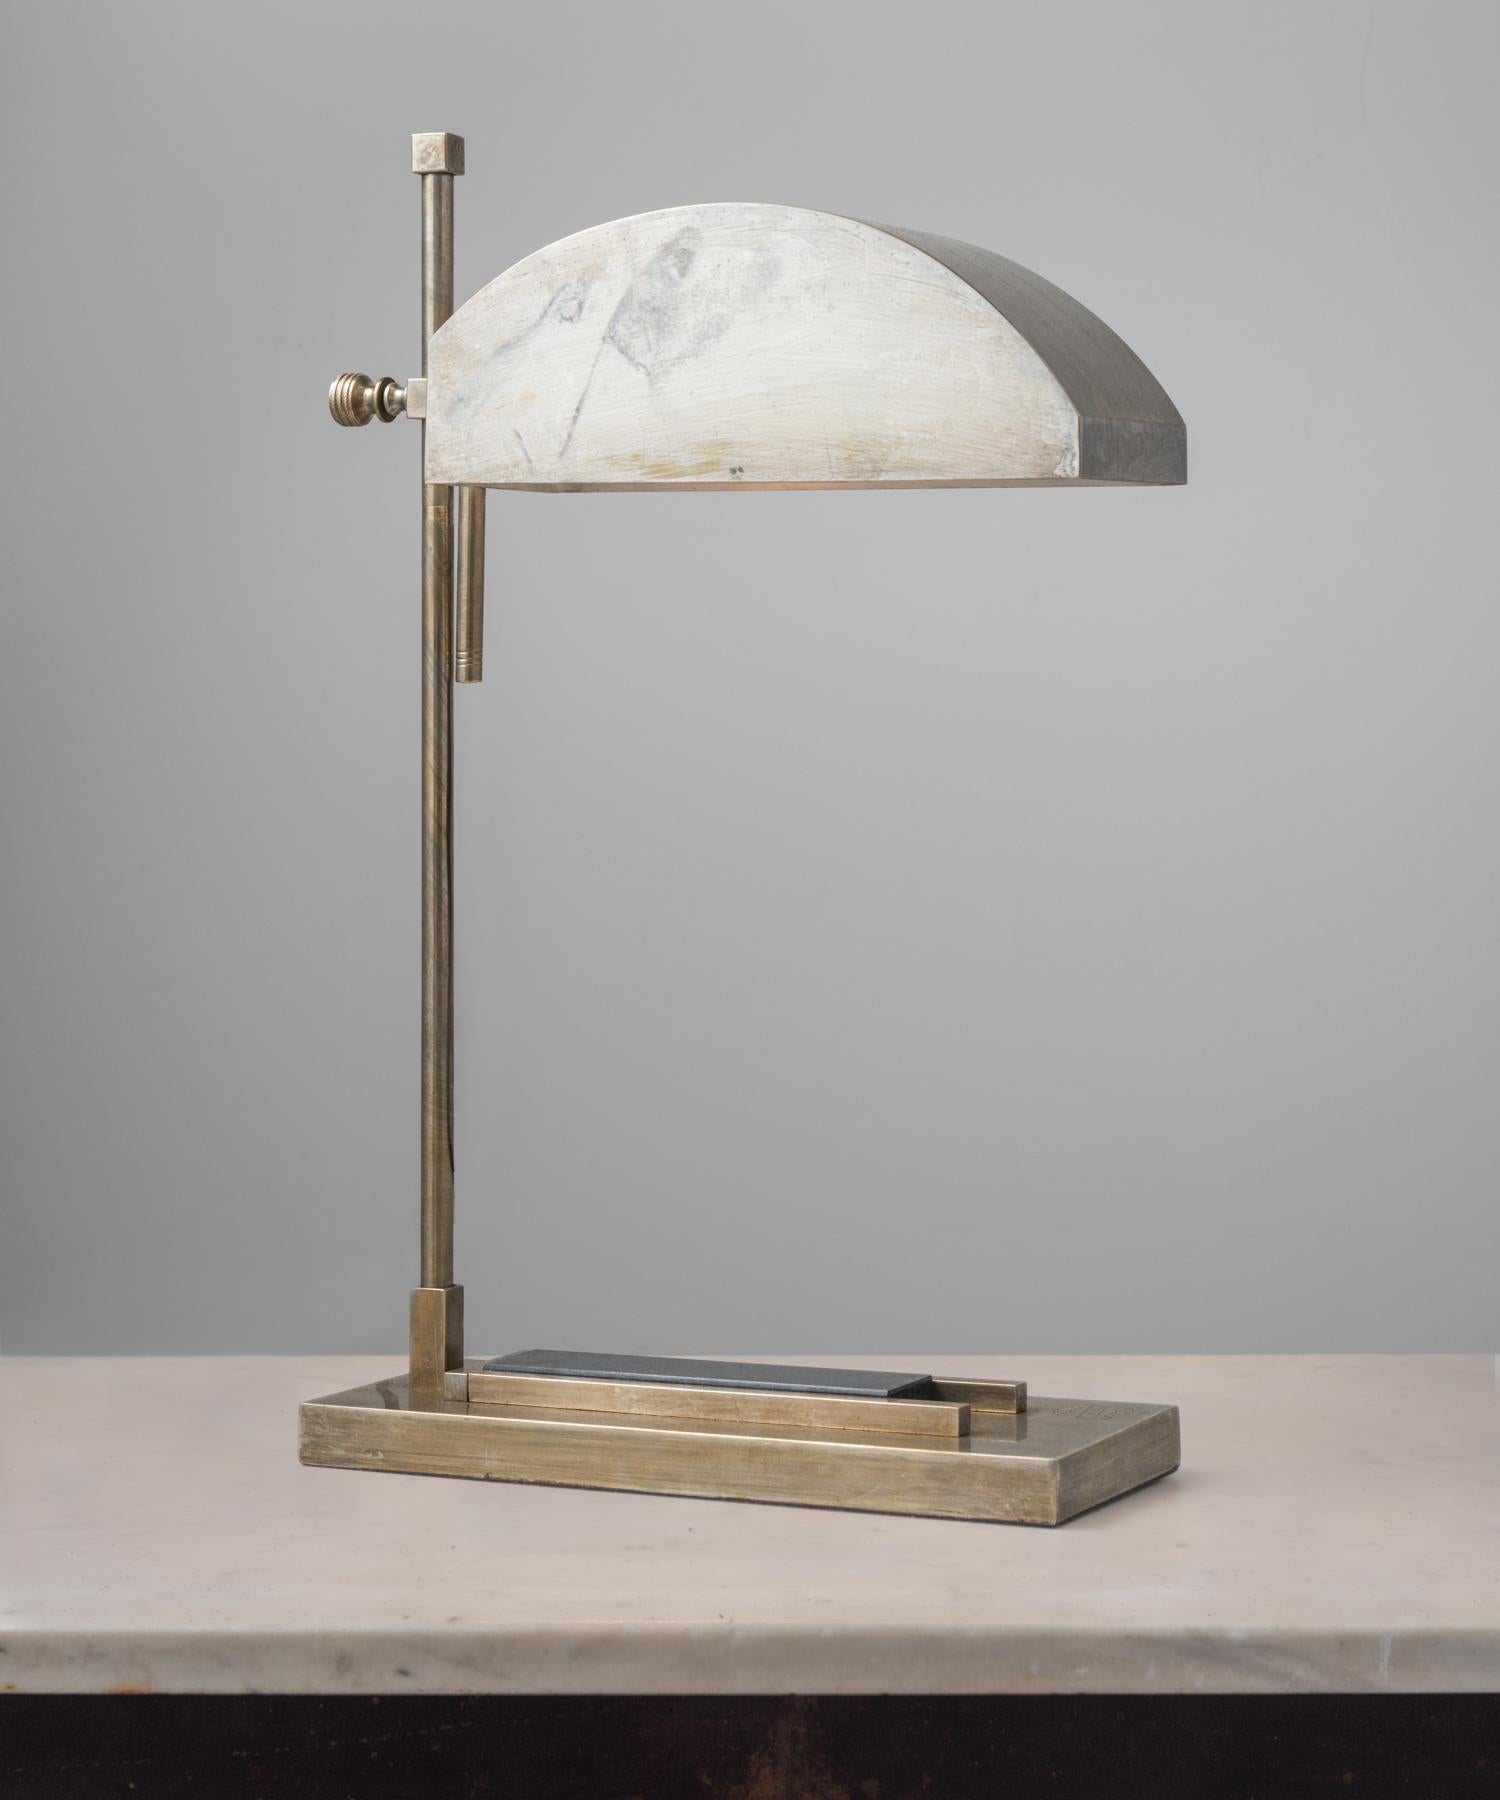 Marcel Breuer Desk Lamp, Germany, circa 1925

Created for the International Exposition of Modern Industrial and Decorative Arts in Paris. Brass-plated nickel and stamped 